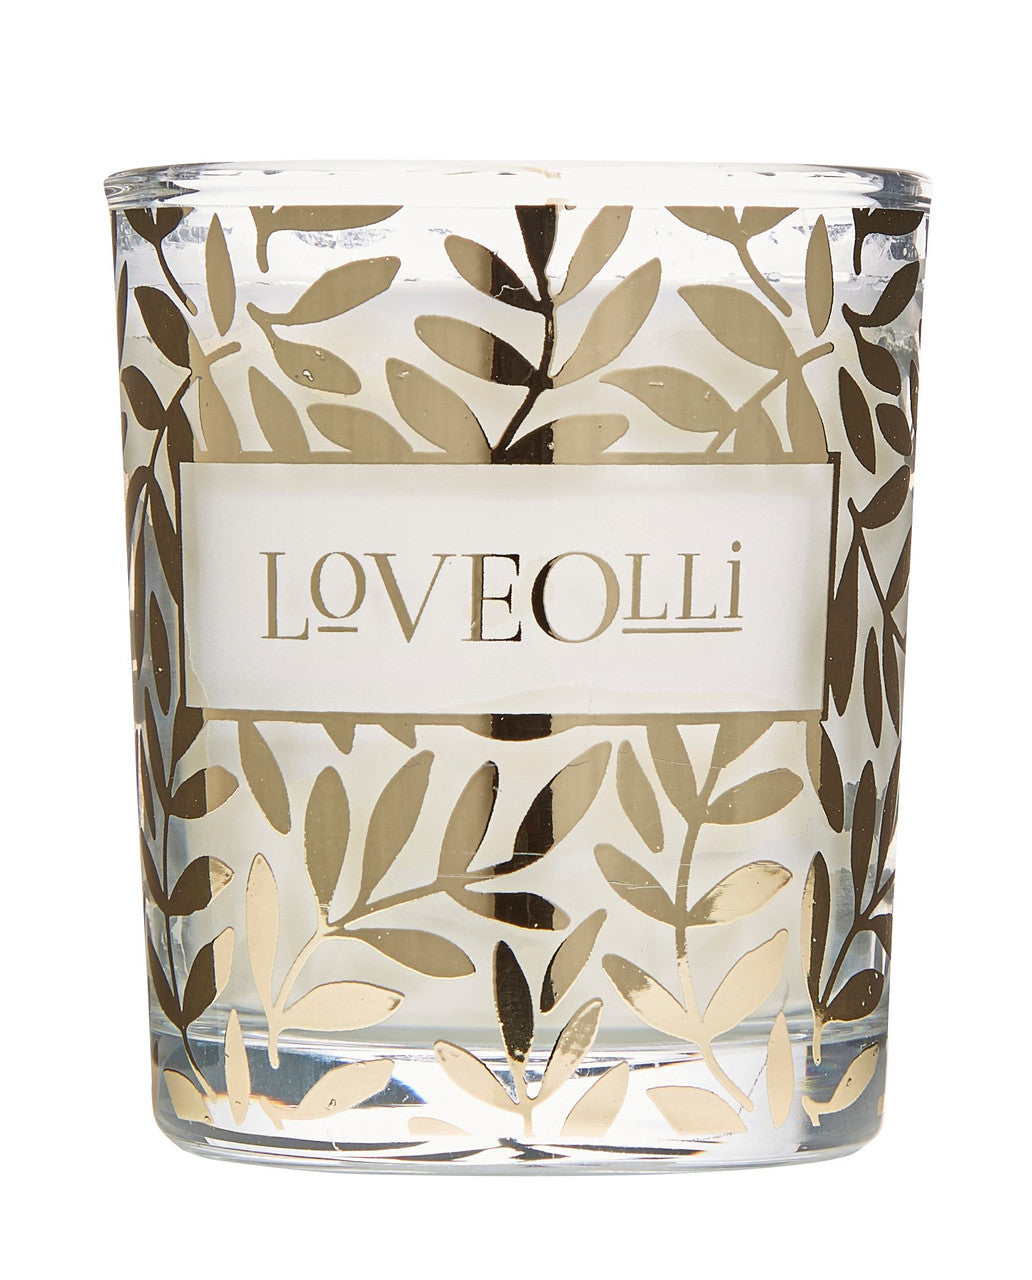 Love Olli Hot Toddy scented votive candle. Hand poured in the UK.